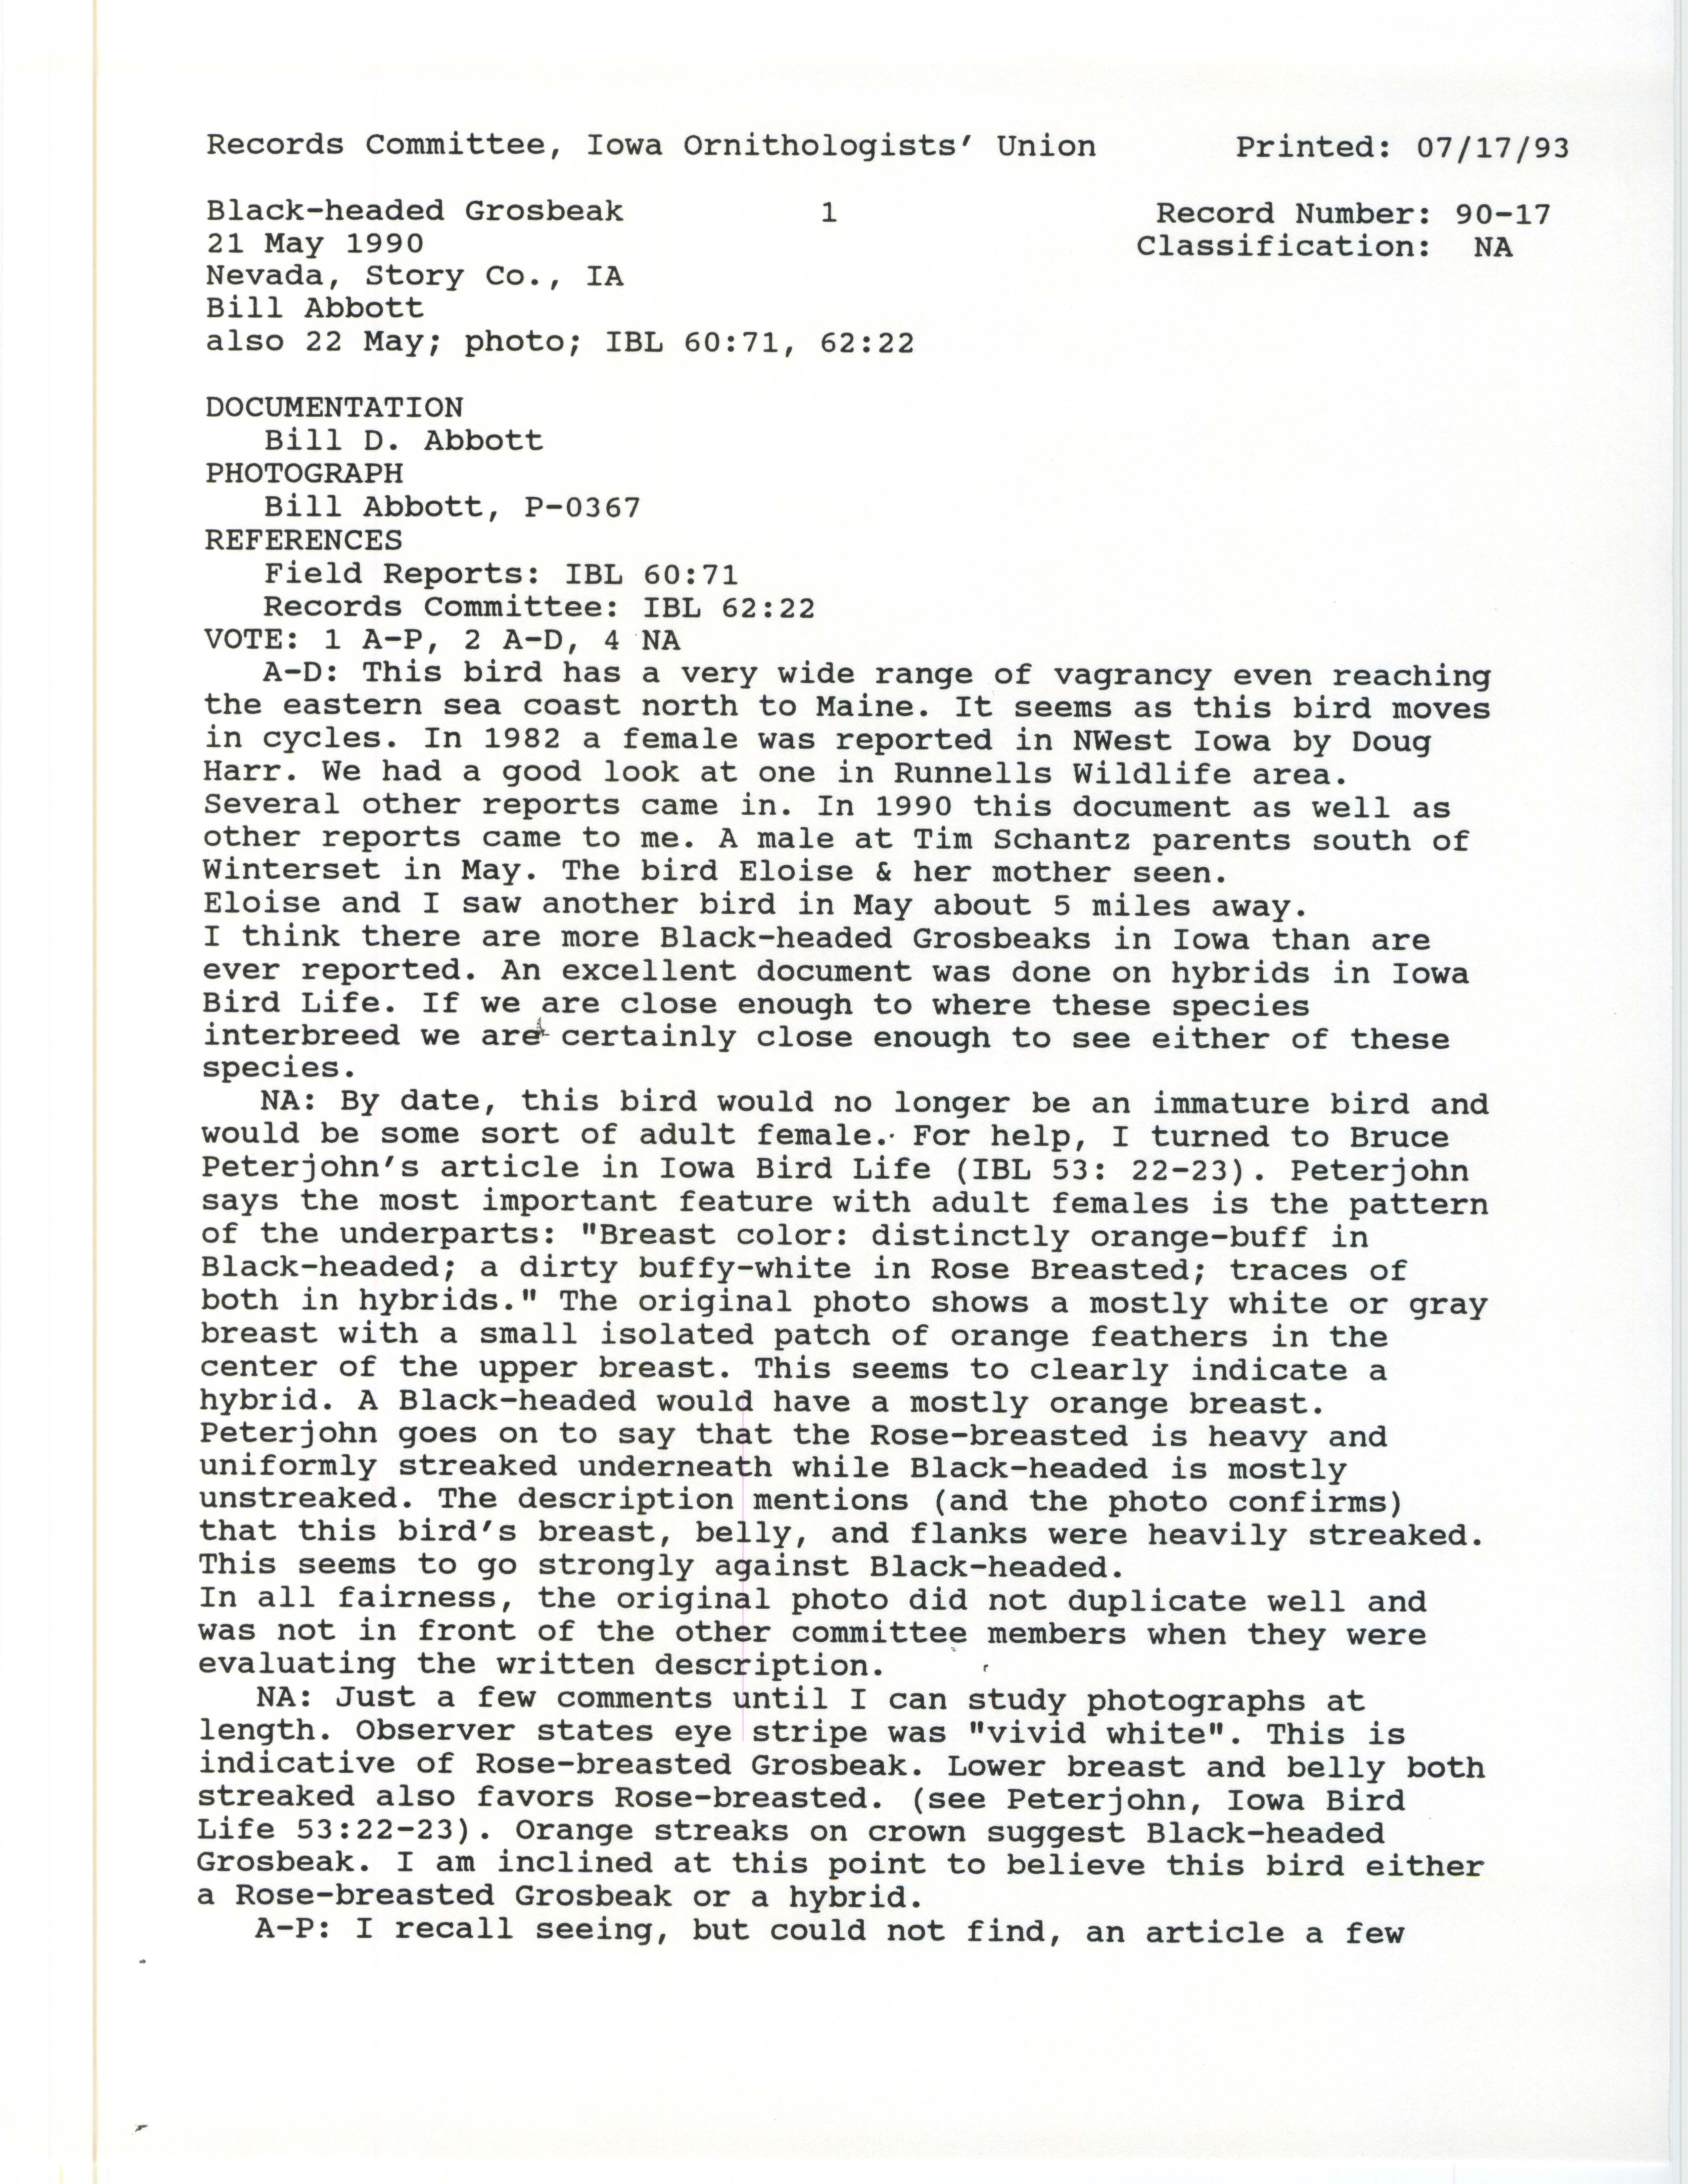 Records Committee review for rare bird sighting for Black-headed Grosbeak at Nevada, 1990